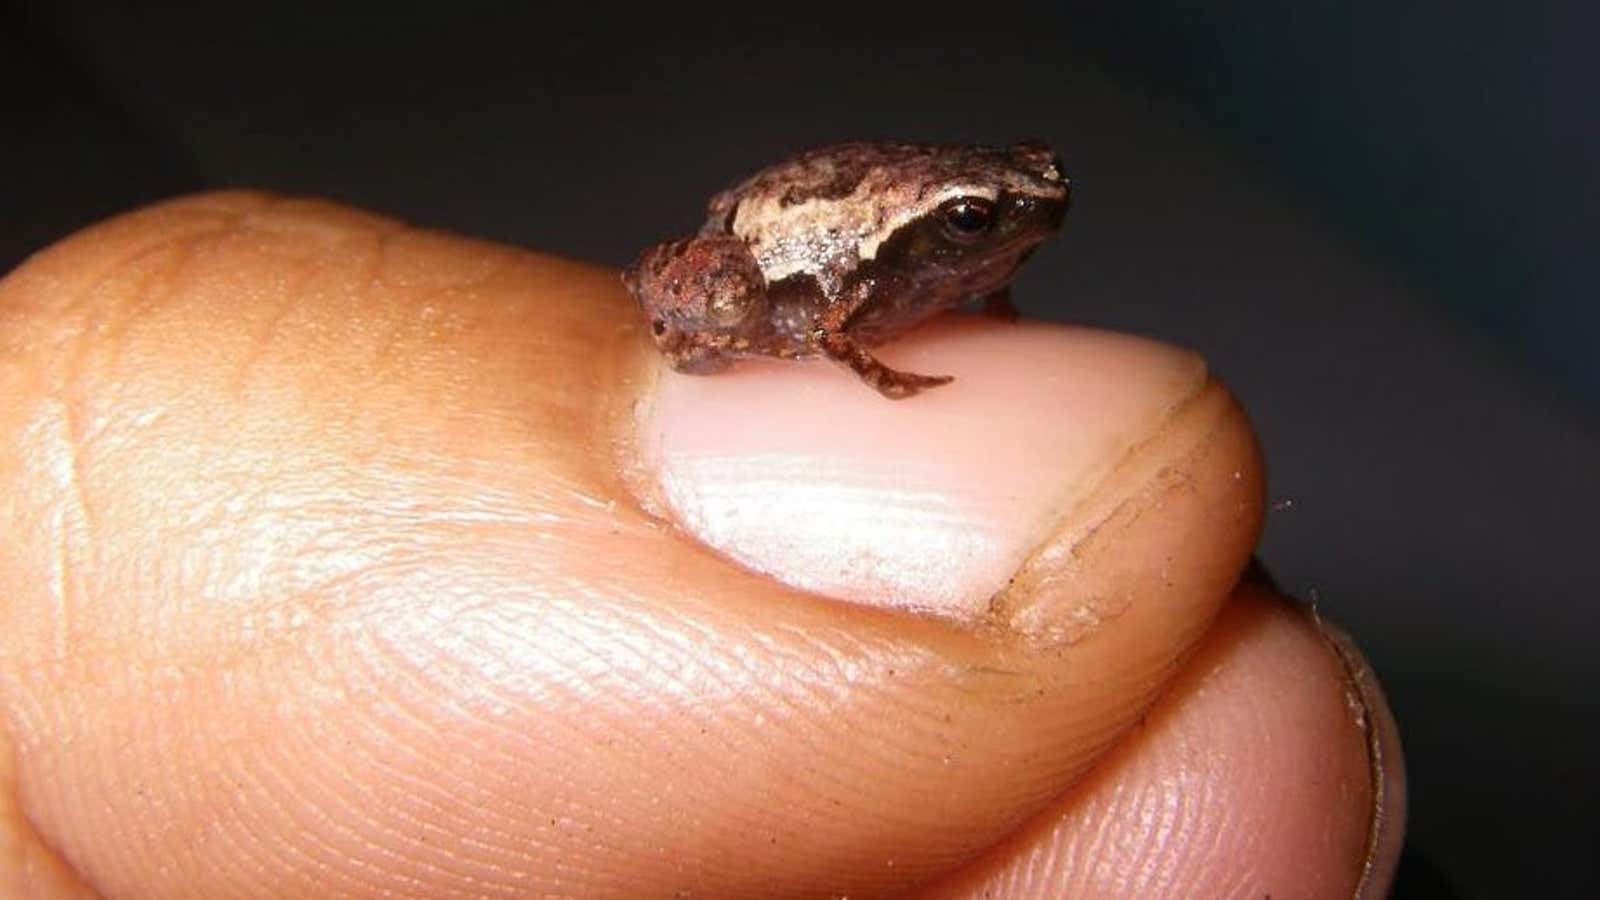 An adult male “Mini mum”, one of the world’s smallest frogs, rests on a fingernail with room to spare.